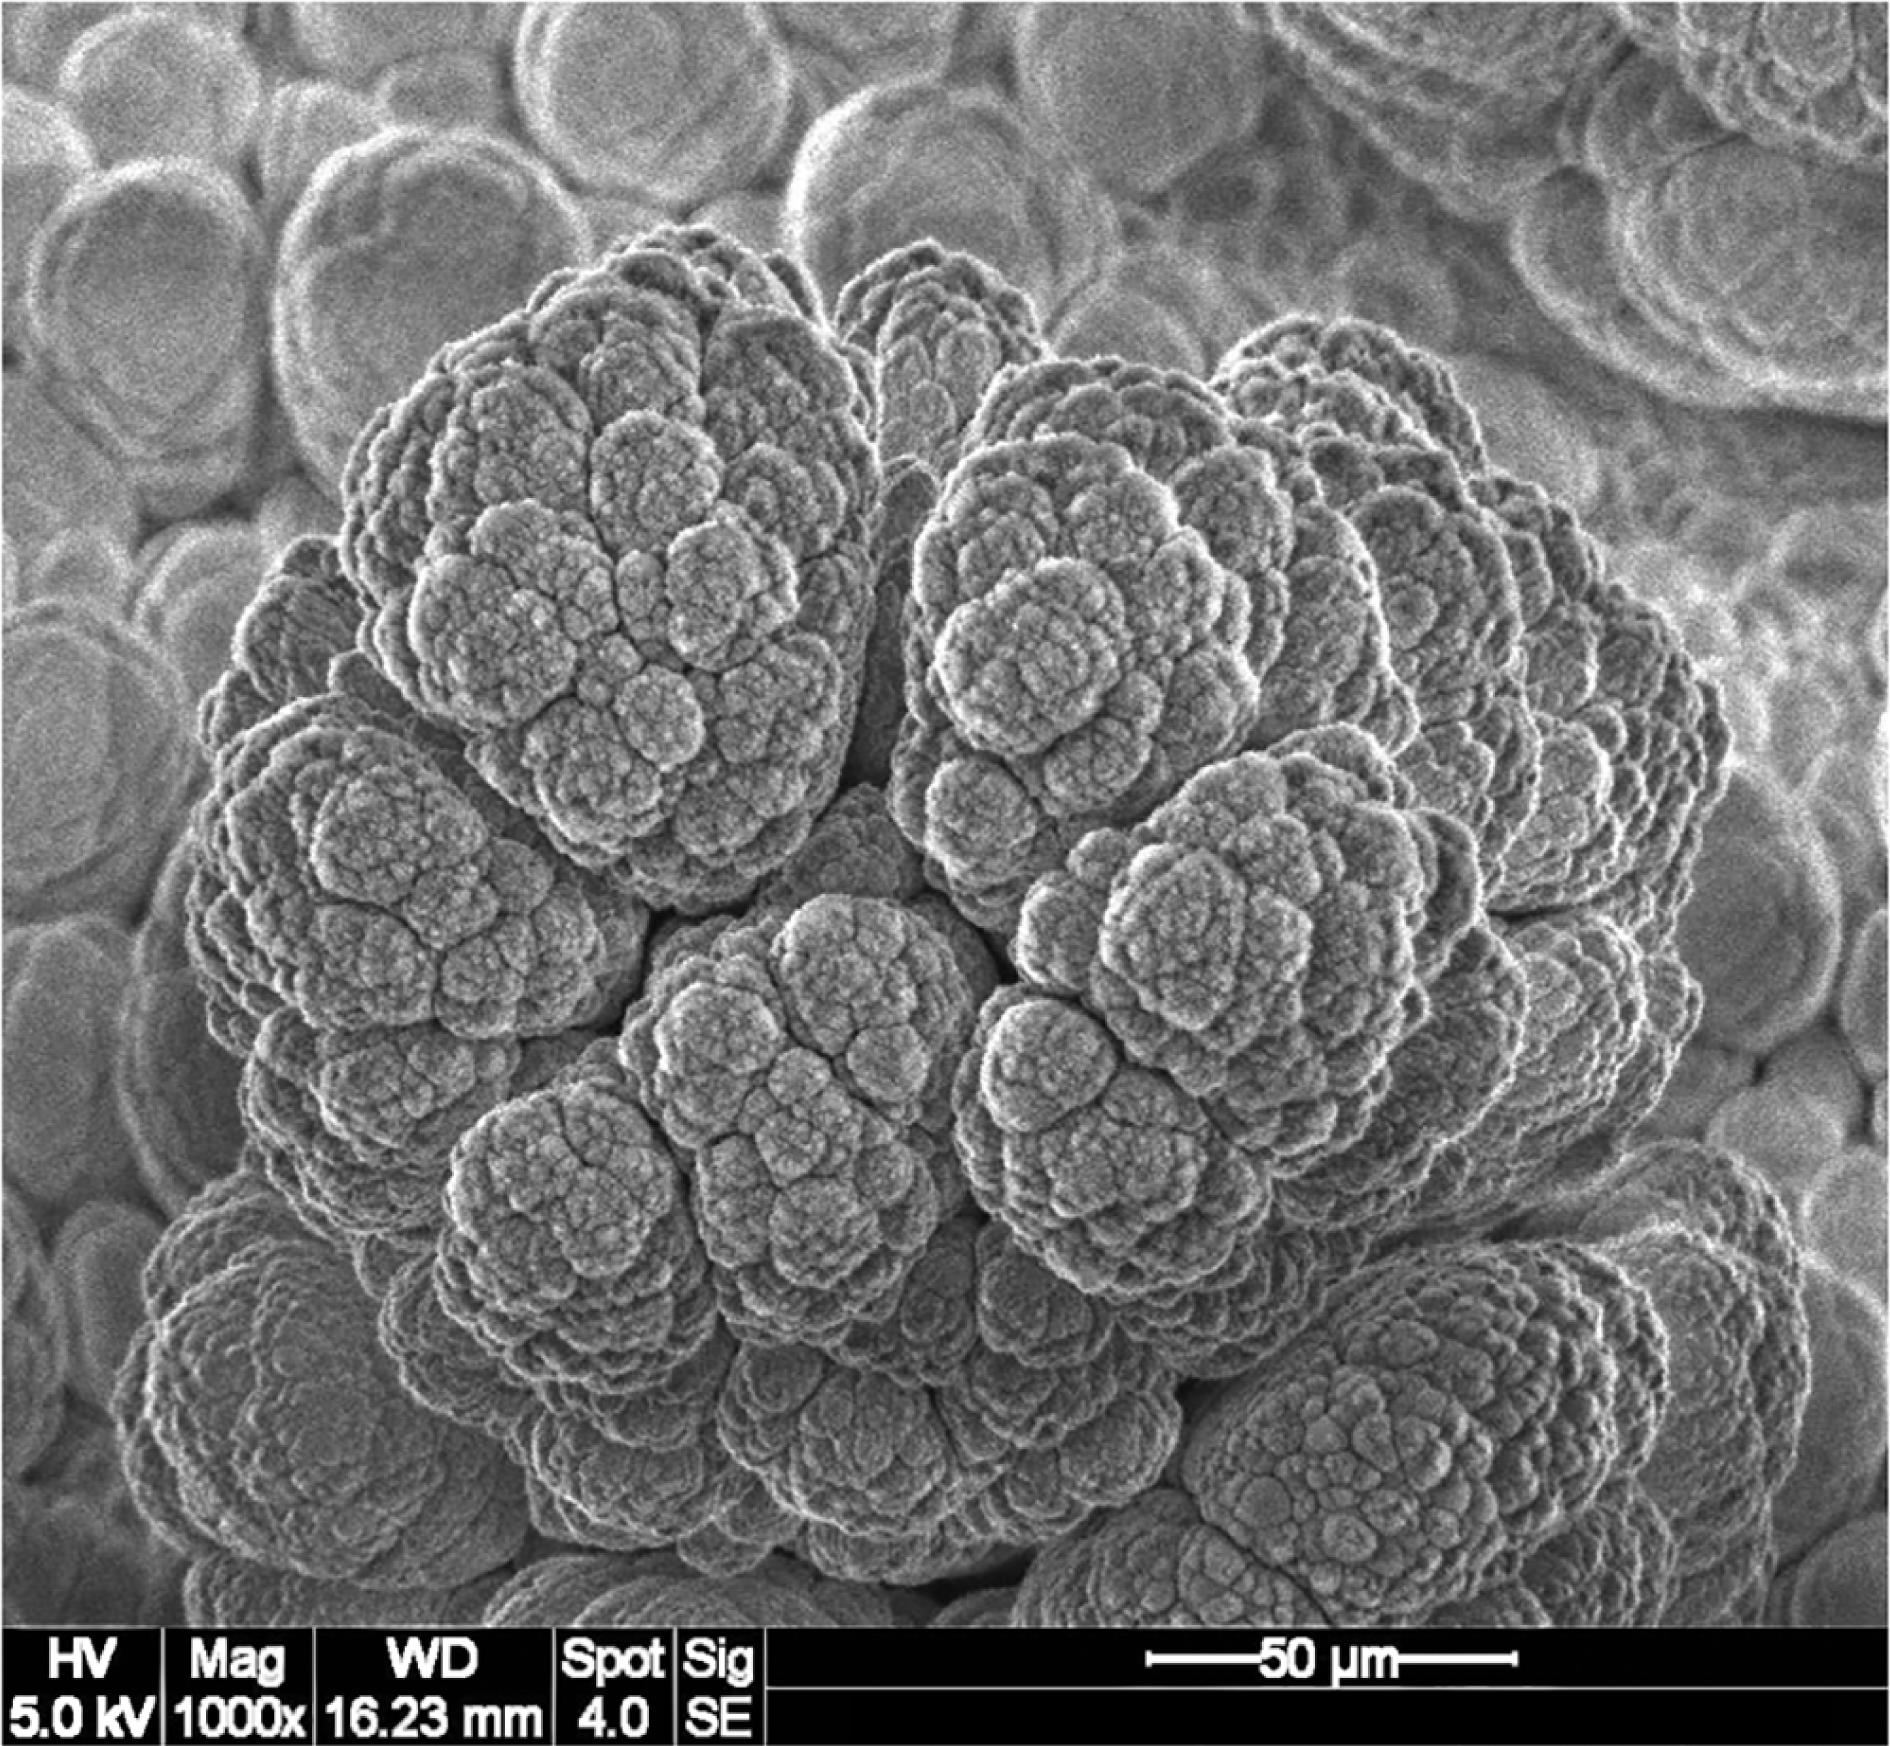 A typical SEM image of the target.